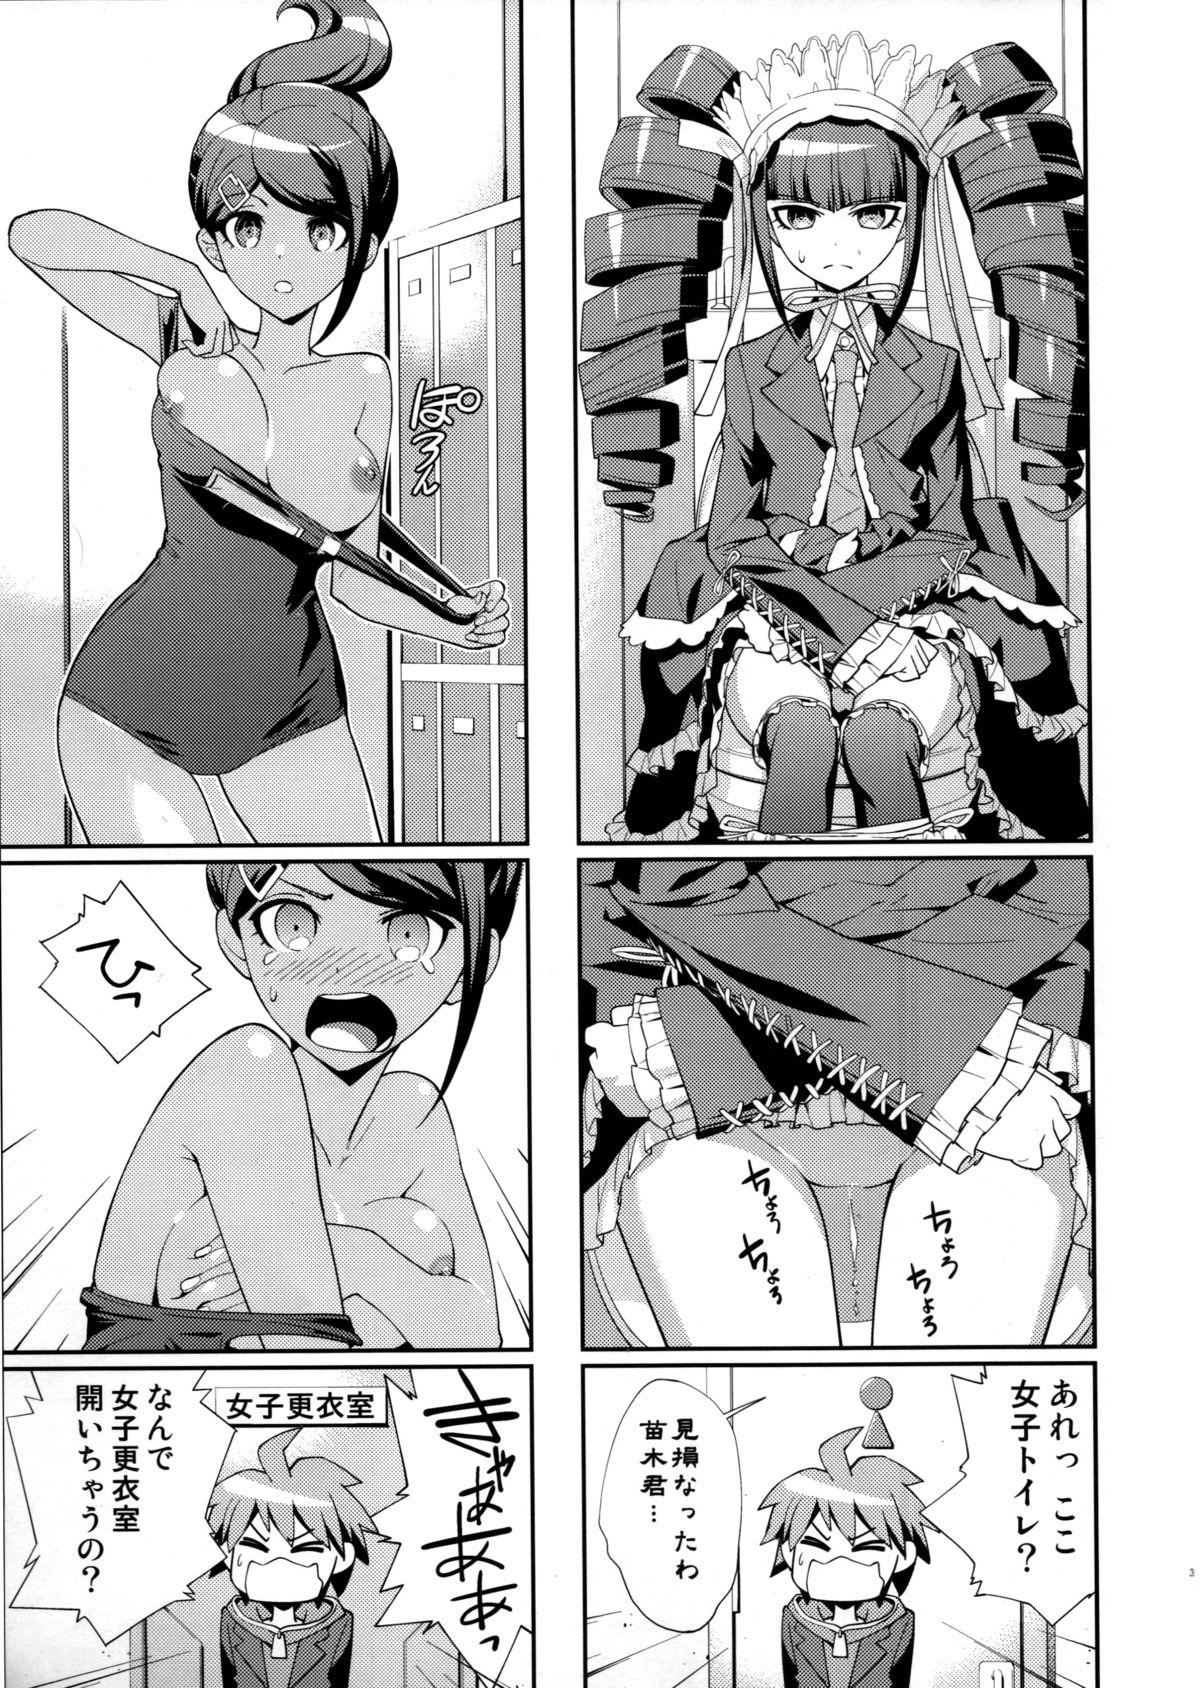 Love accident - Danganronpa Girls Getting Fucked - Page 4